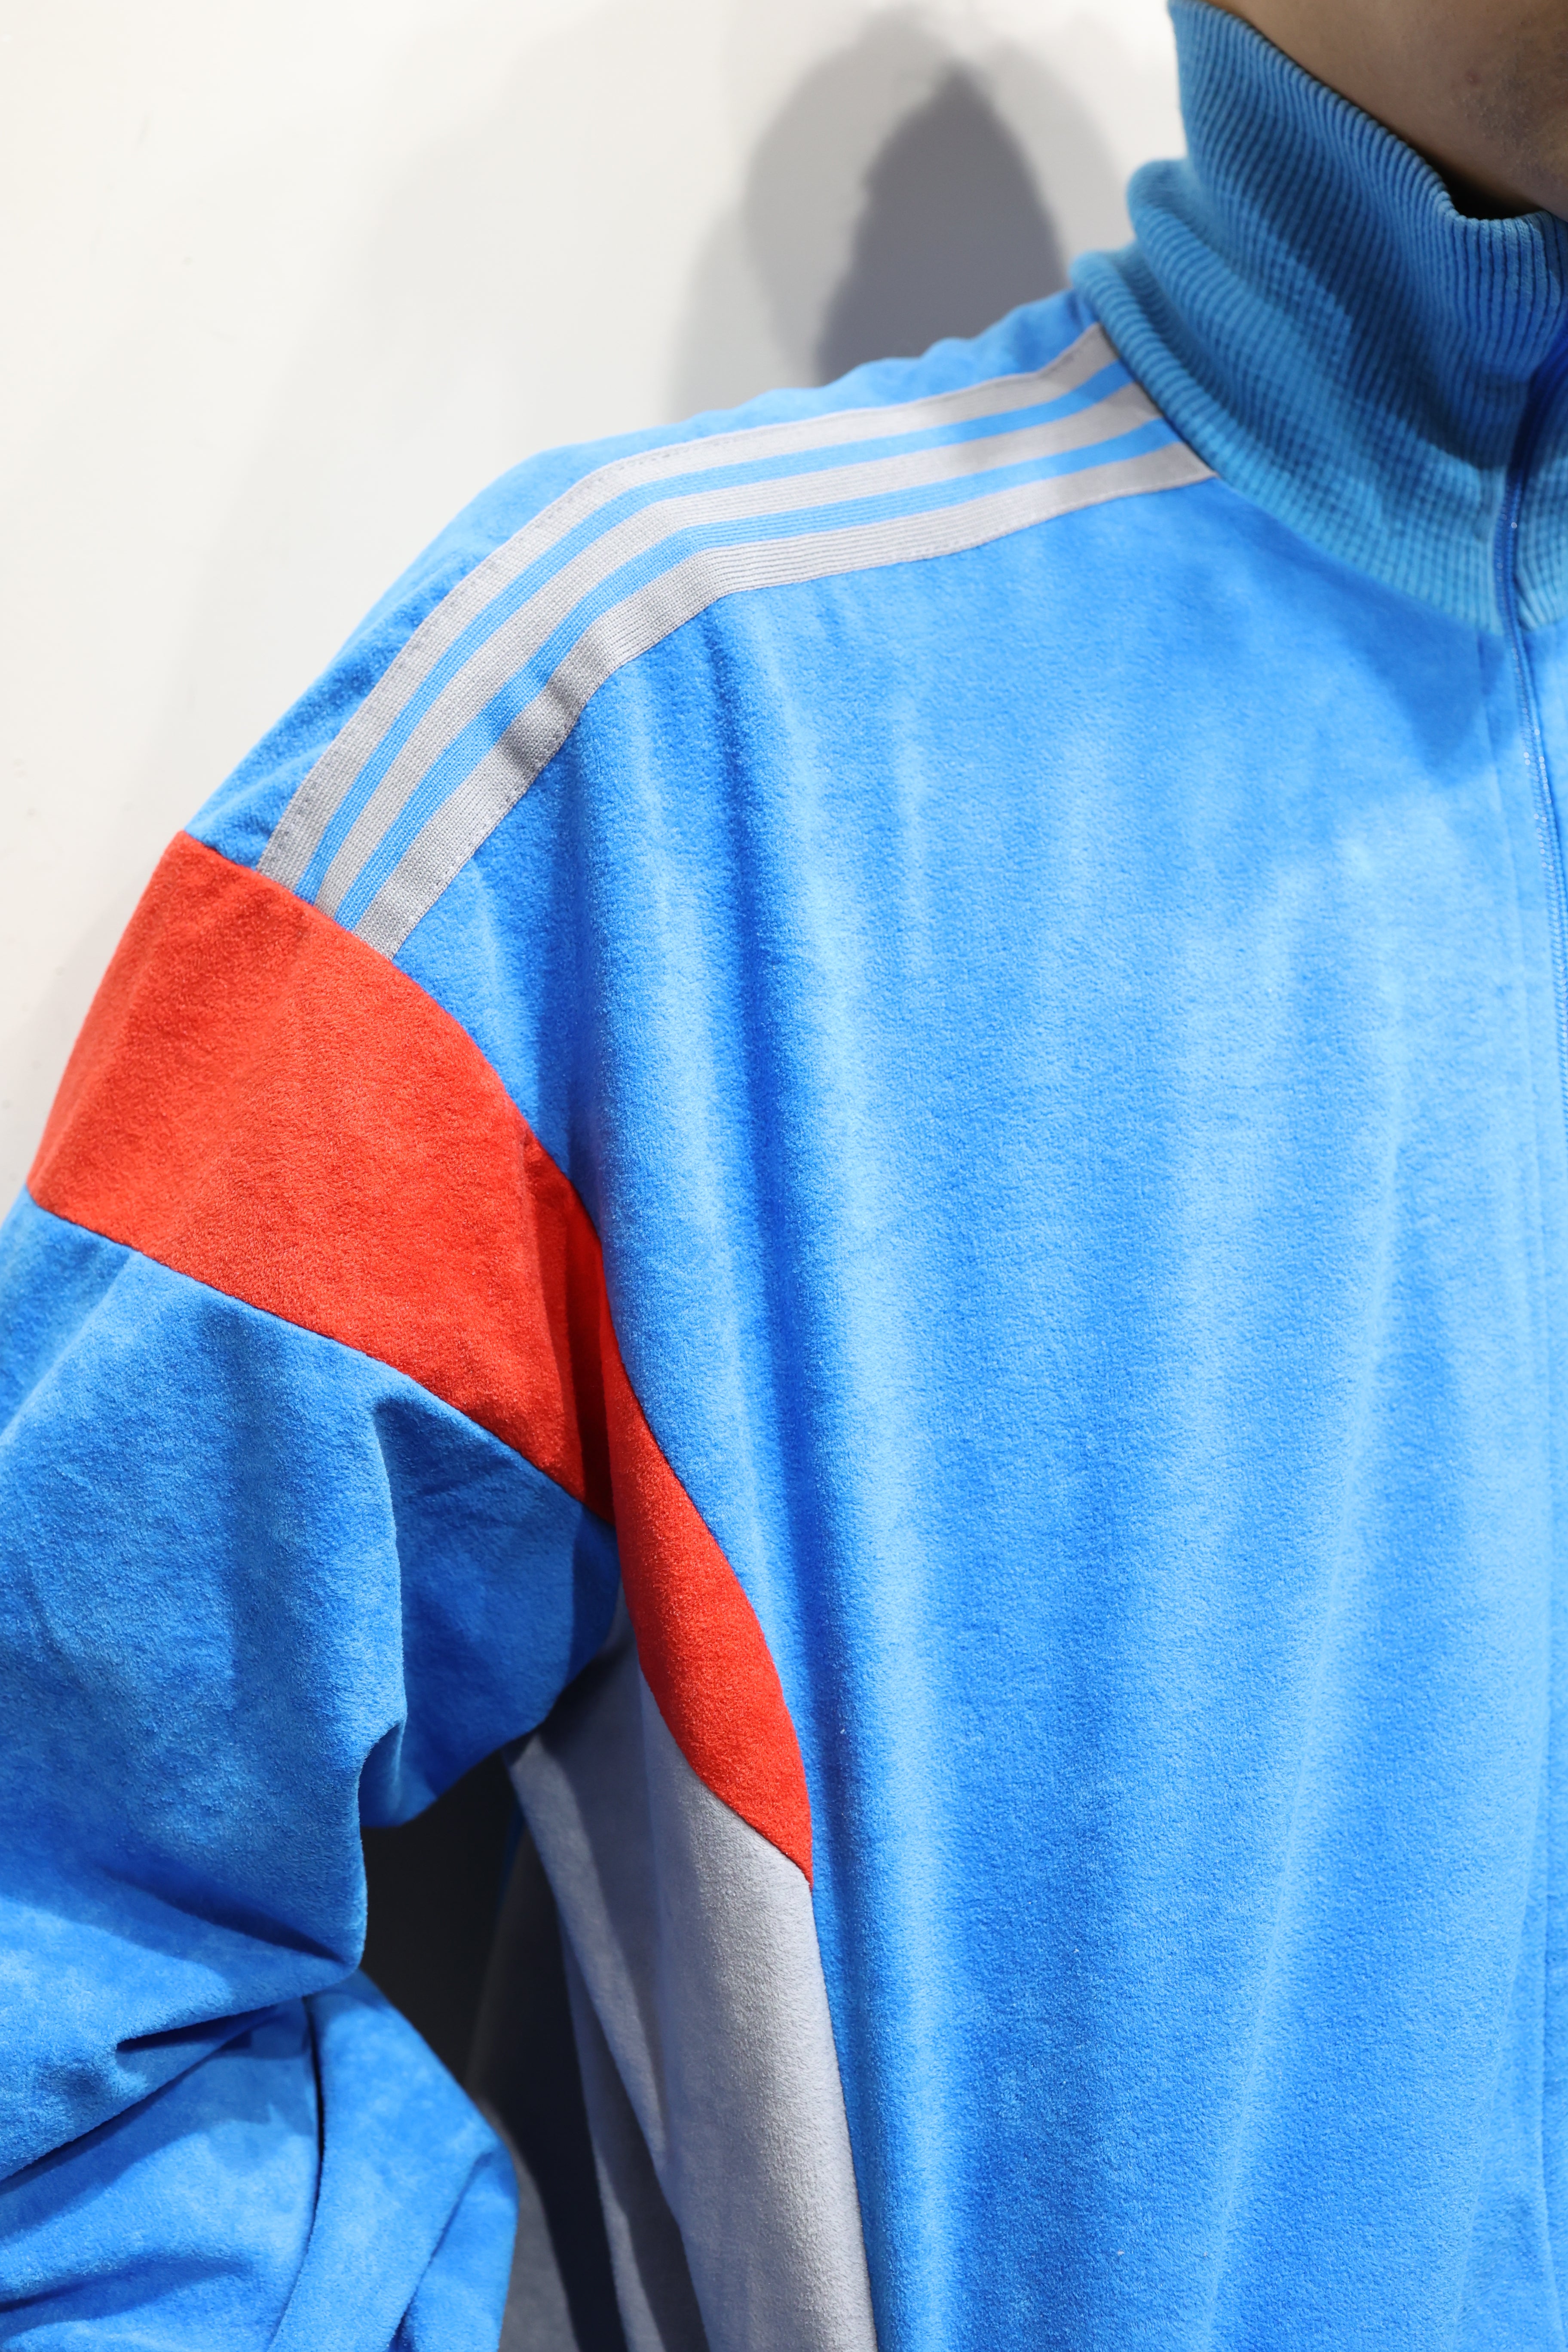 80's Adidas / product VENTAX, made in France